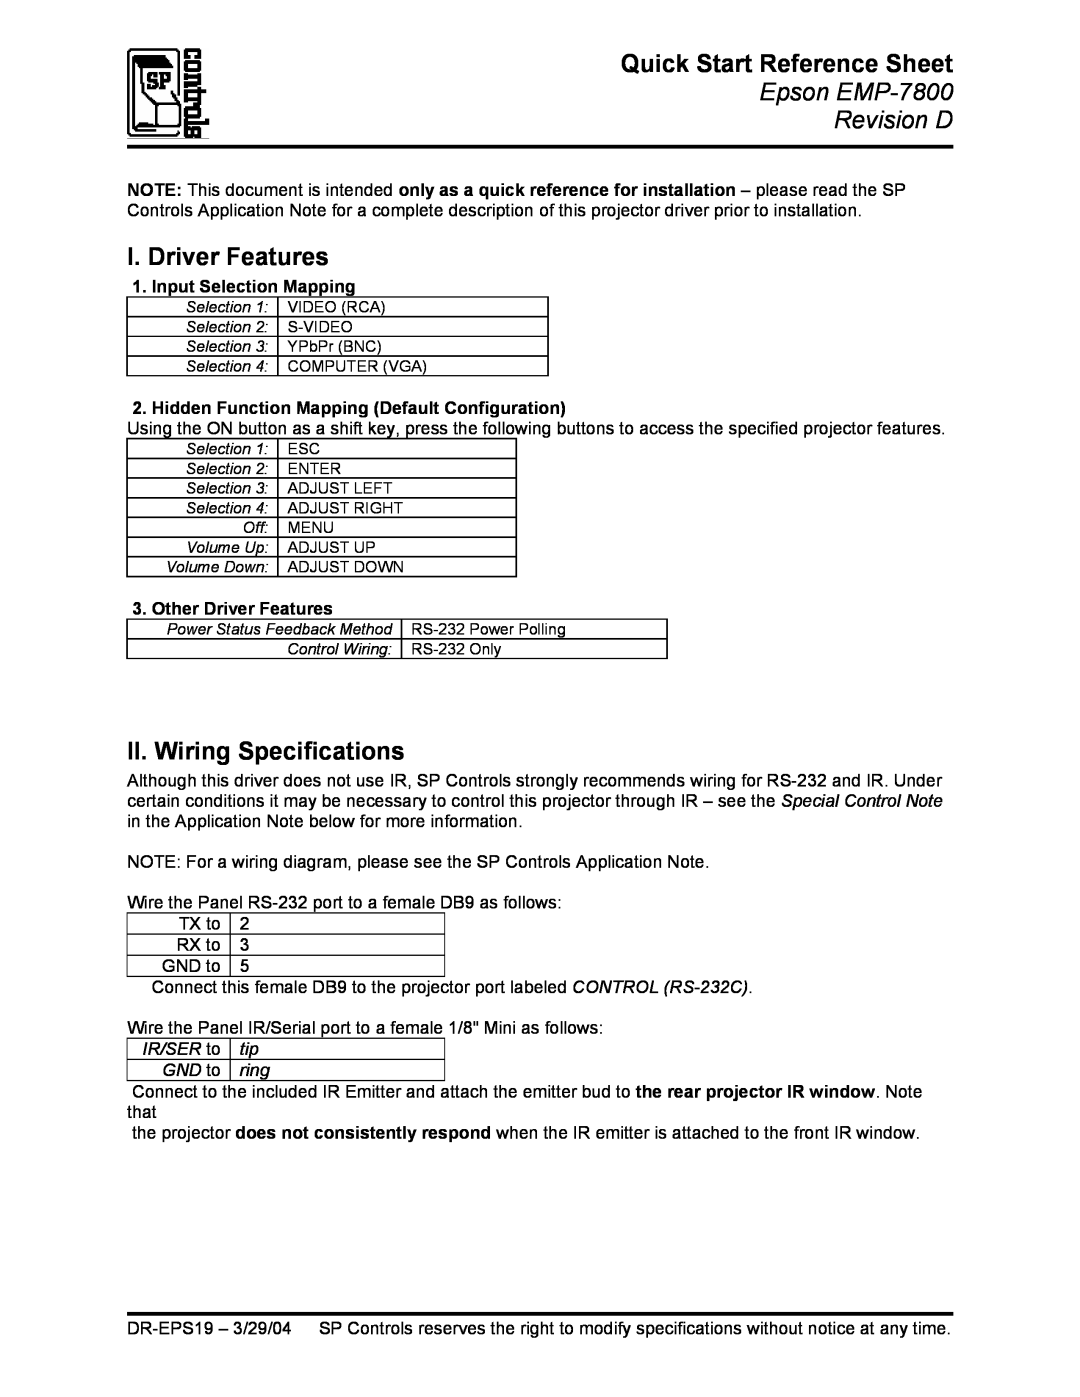 Epson DR-EPS19 quick start Quick Start Reference Sheet, Epson EMP-7800 Revision D, I. Driver Features 